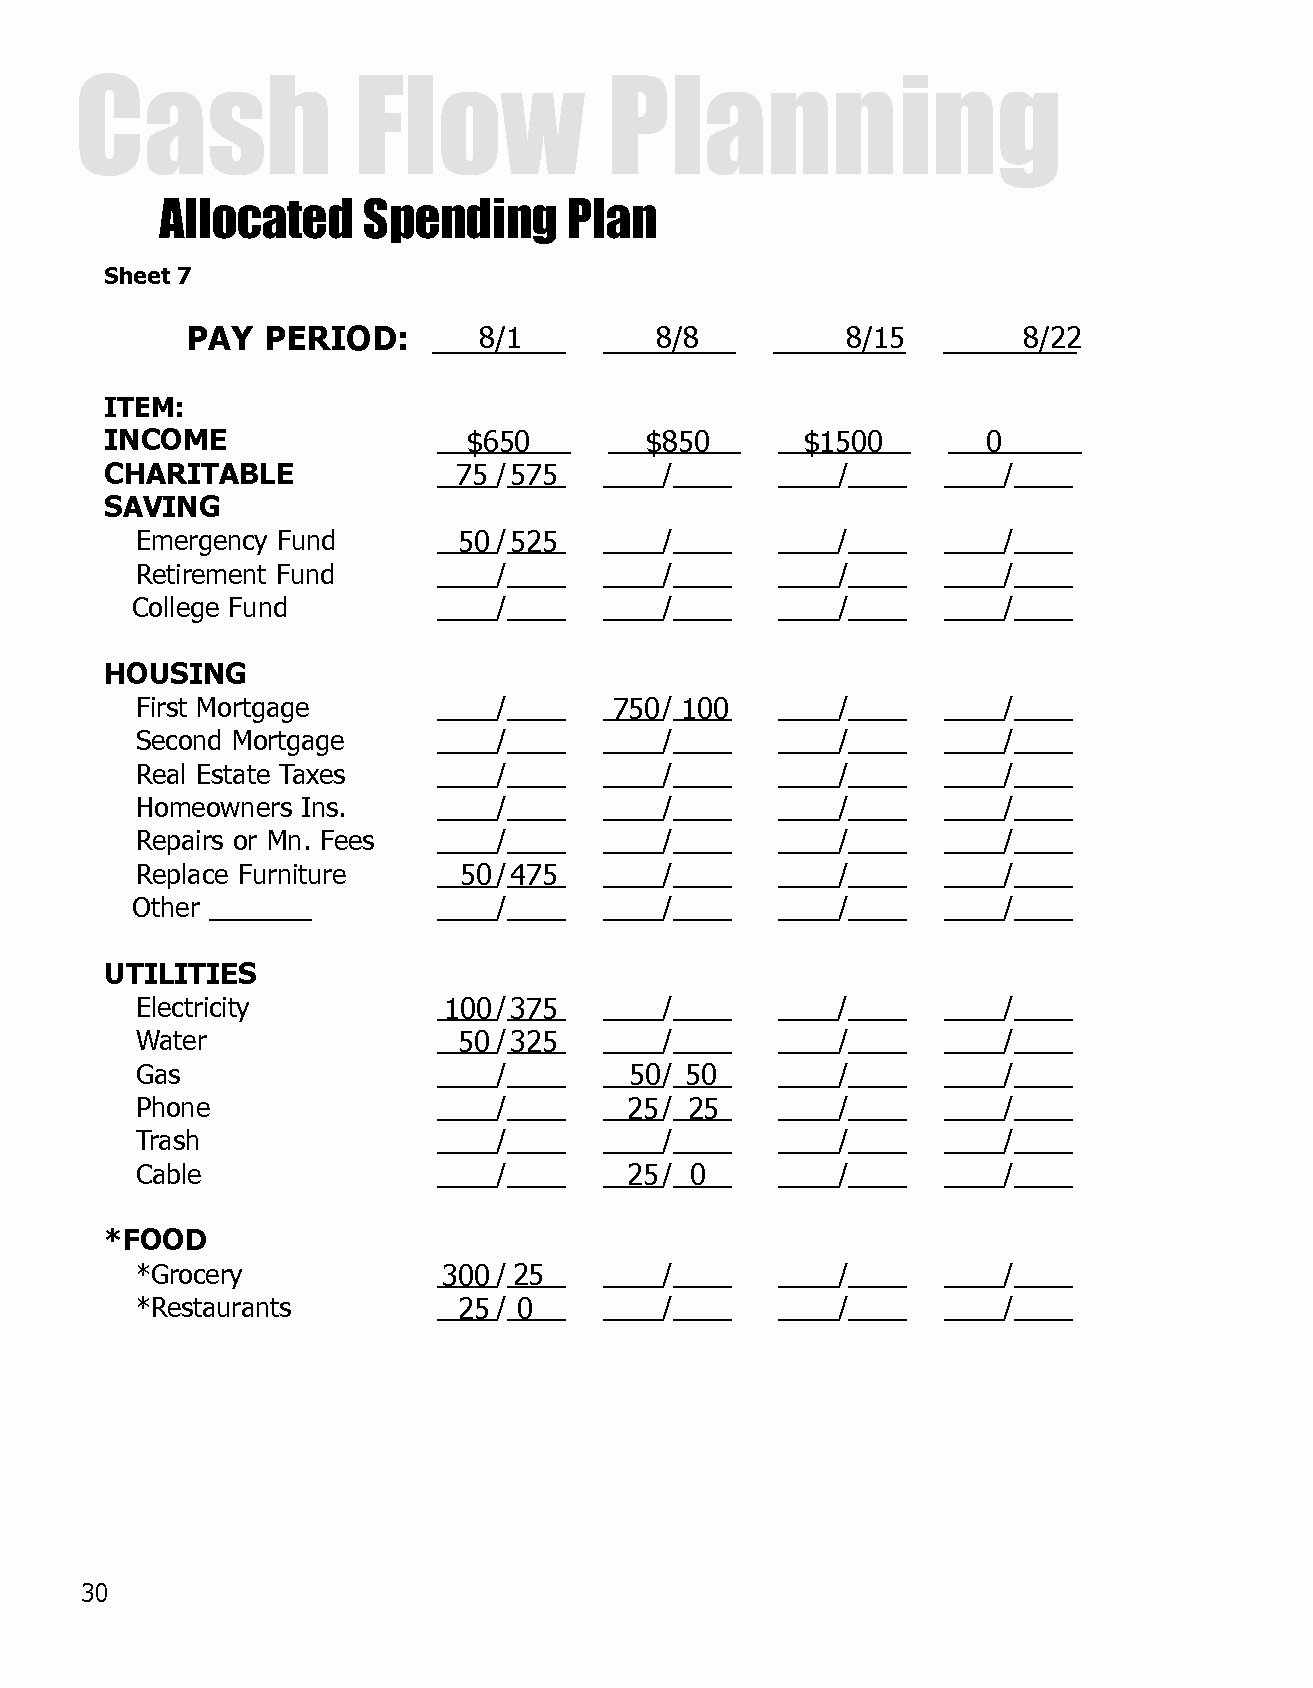 Financial Peace University Forms Form Templates Allocated Spending Document Dave Ramsey Plan Pdf